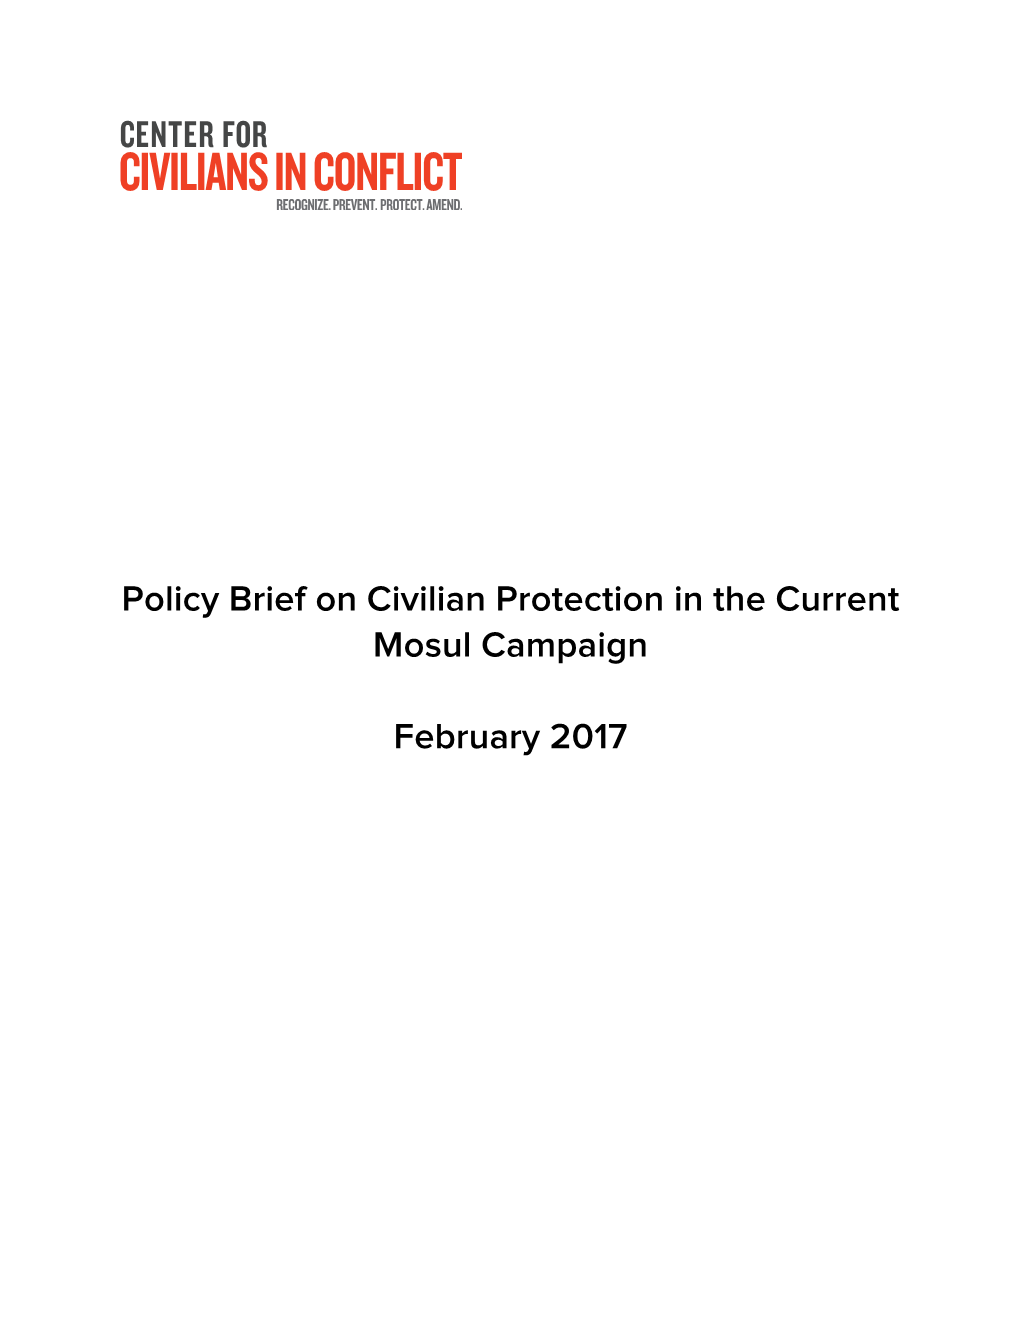 Policy Brief on Civilian Protection in the Current Mosul Campaign